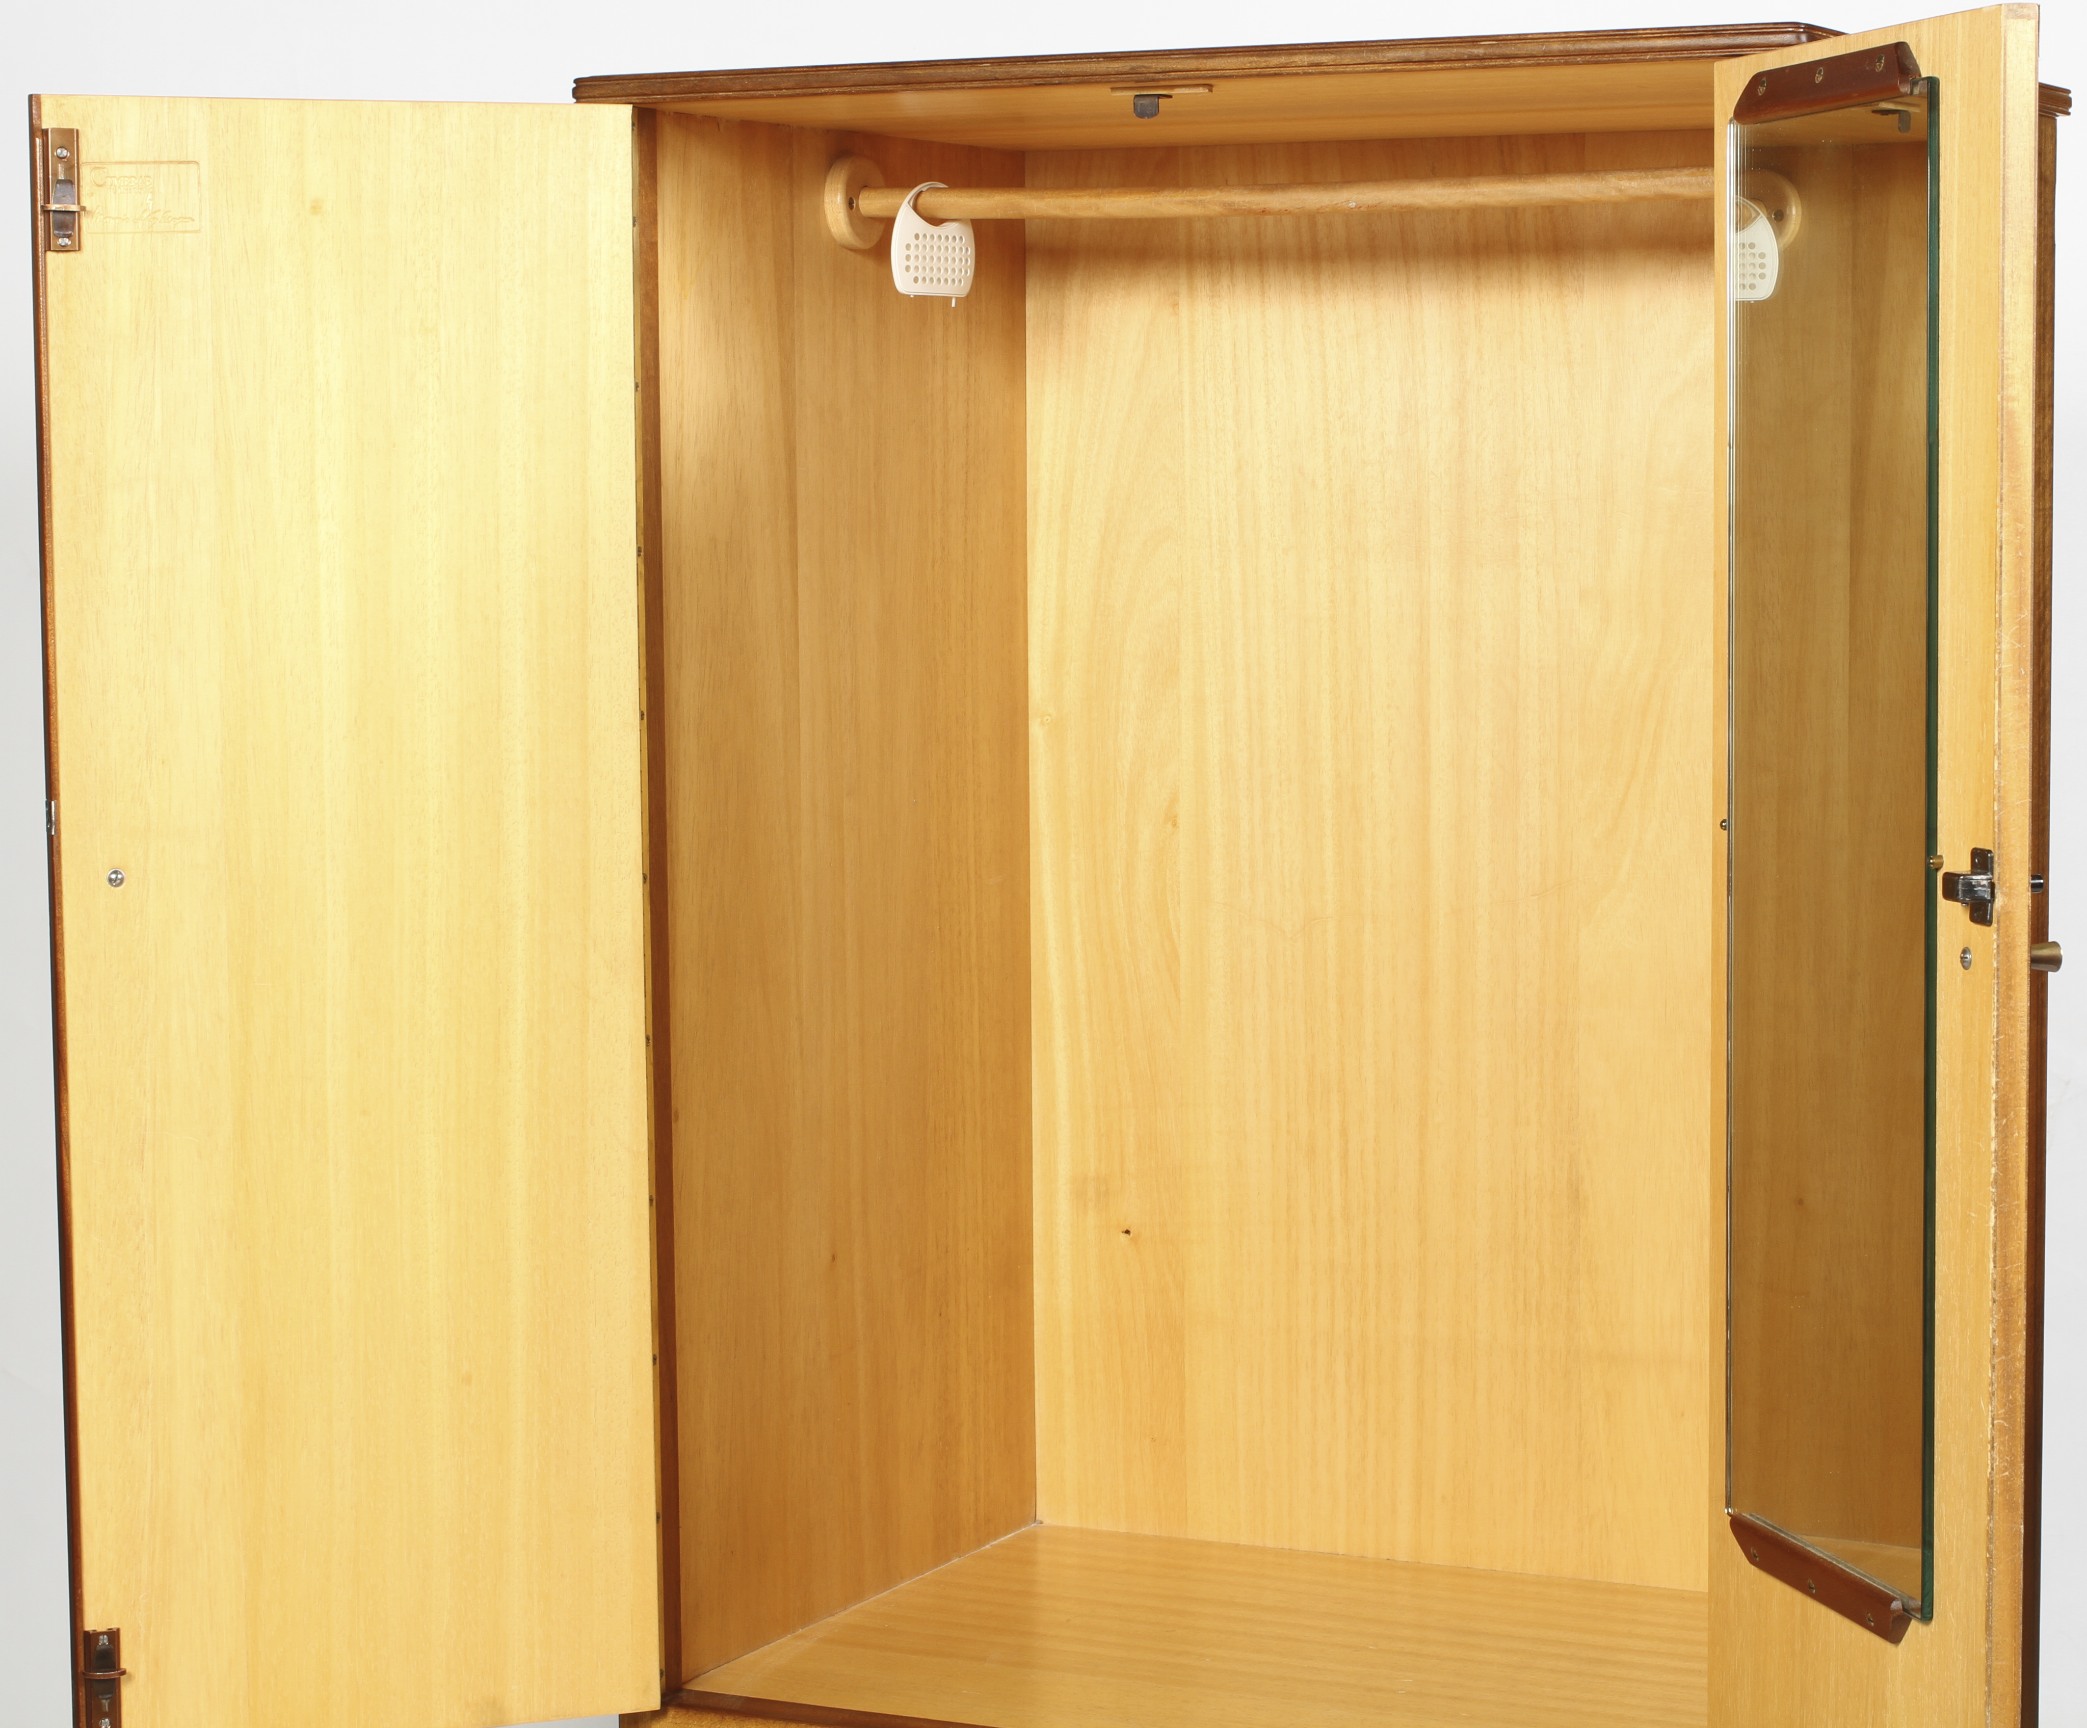 A Cumbrae Furniture by Morris of Glasgow wardrobe. - Image 2 of 3